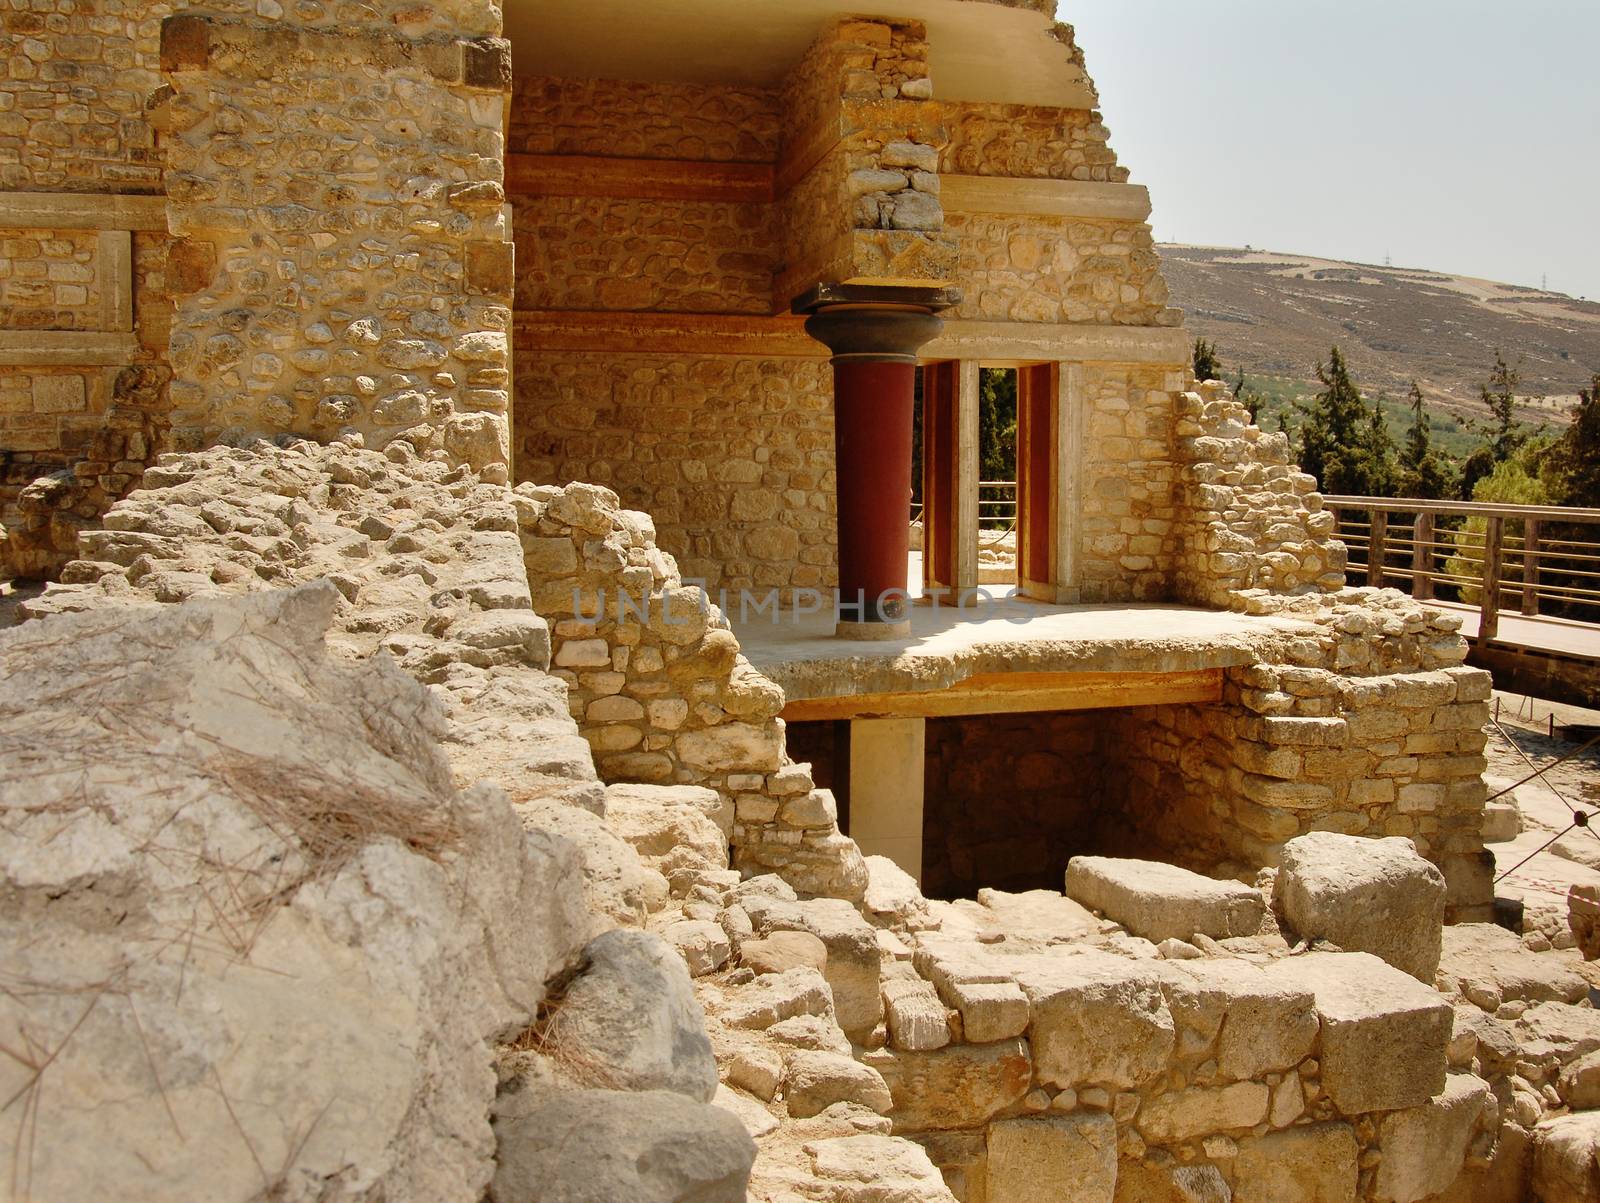 ancient civilization of Knossos by ssuaphoto